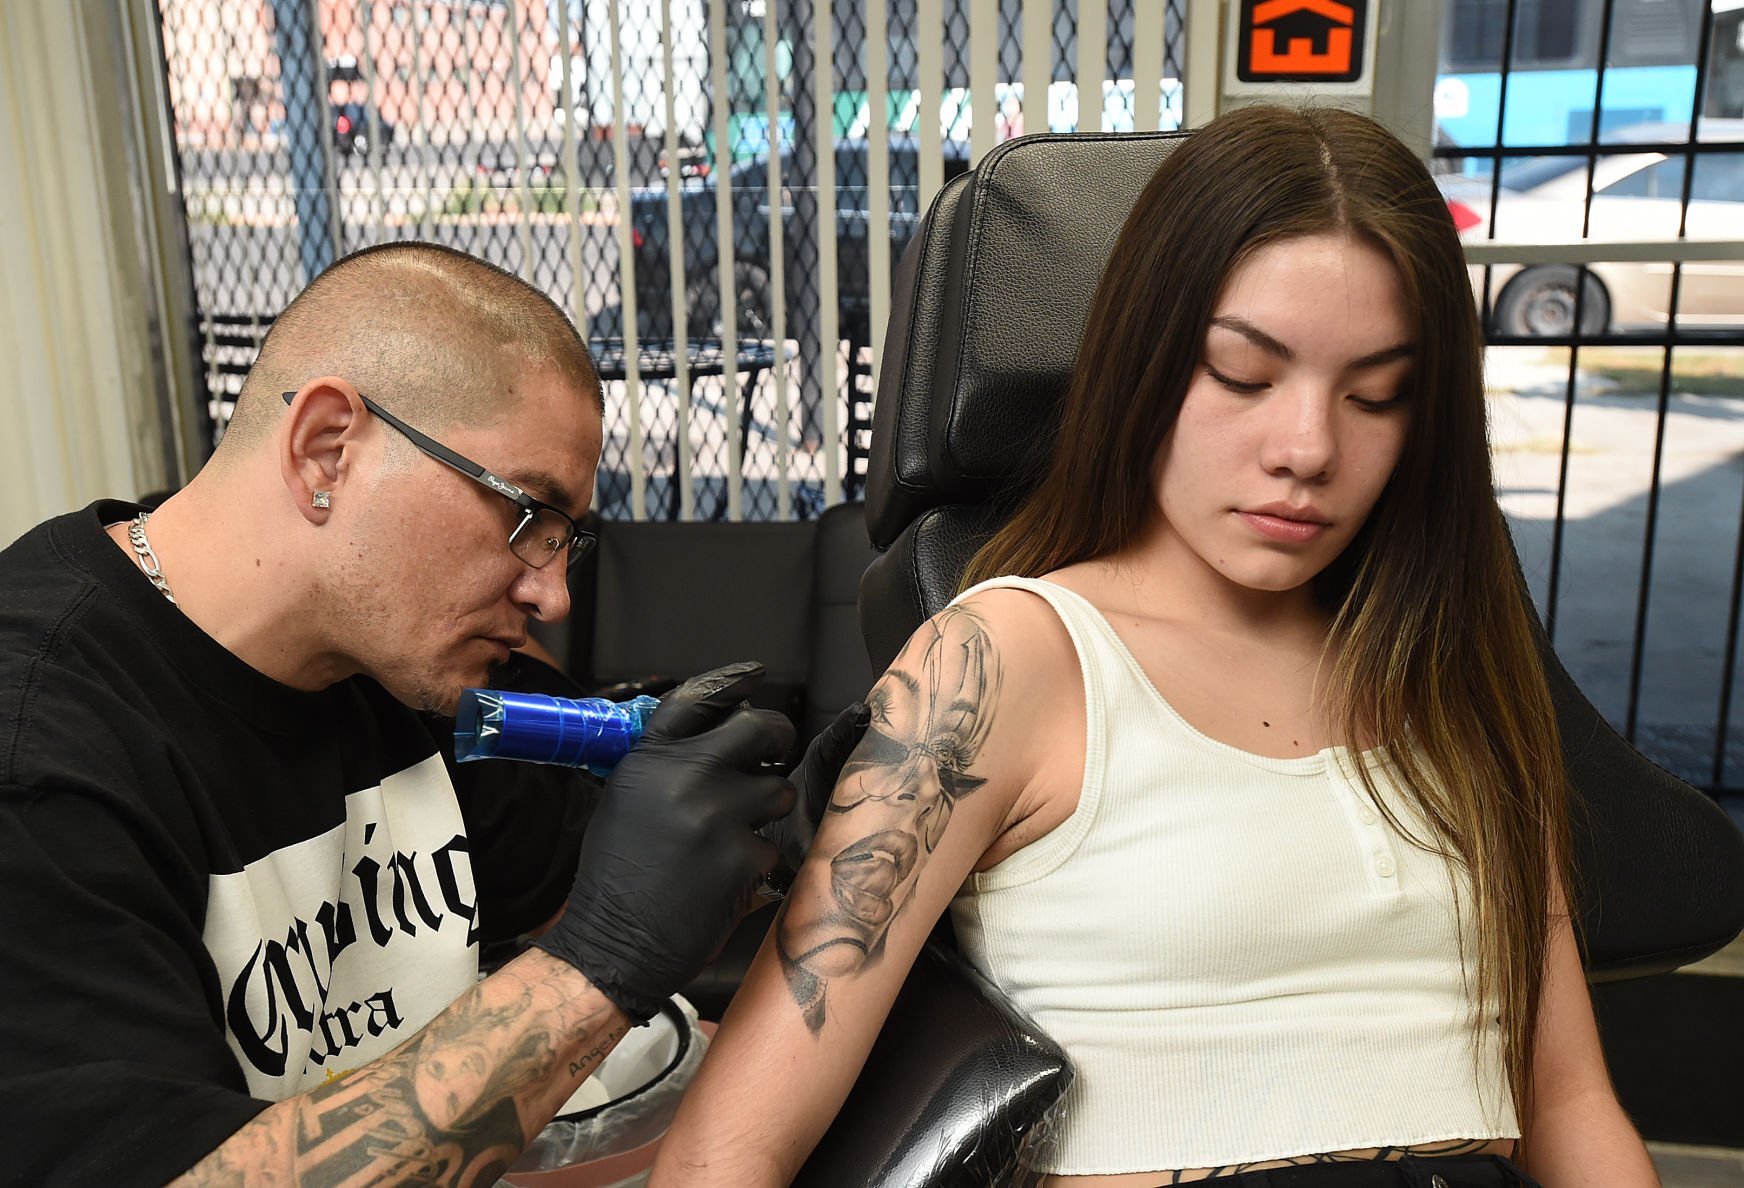 Rise Again Tattoos Beevent raised money for local apiaries